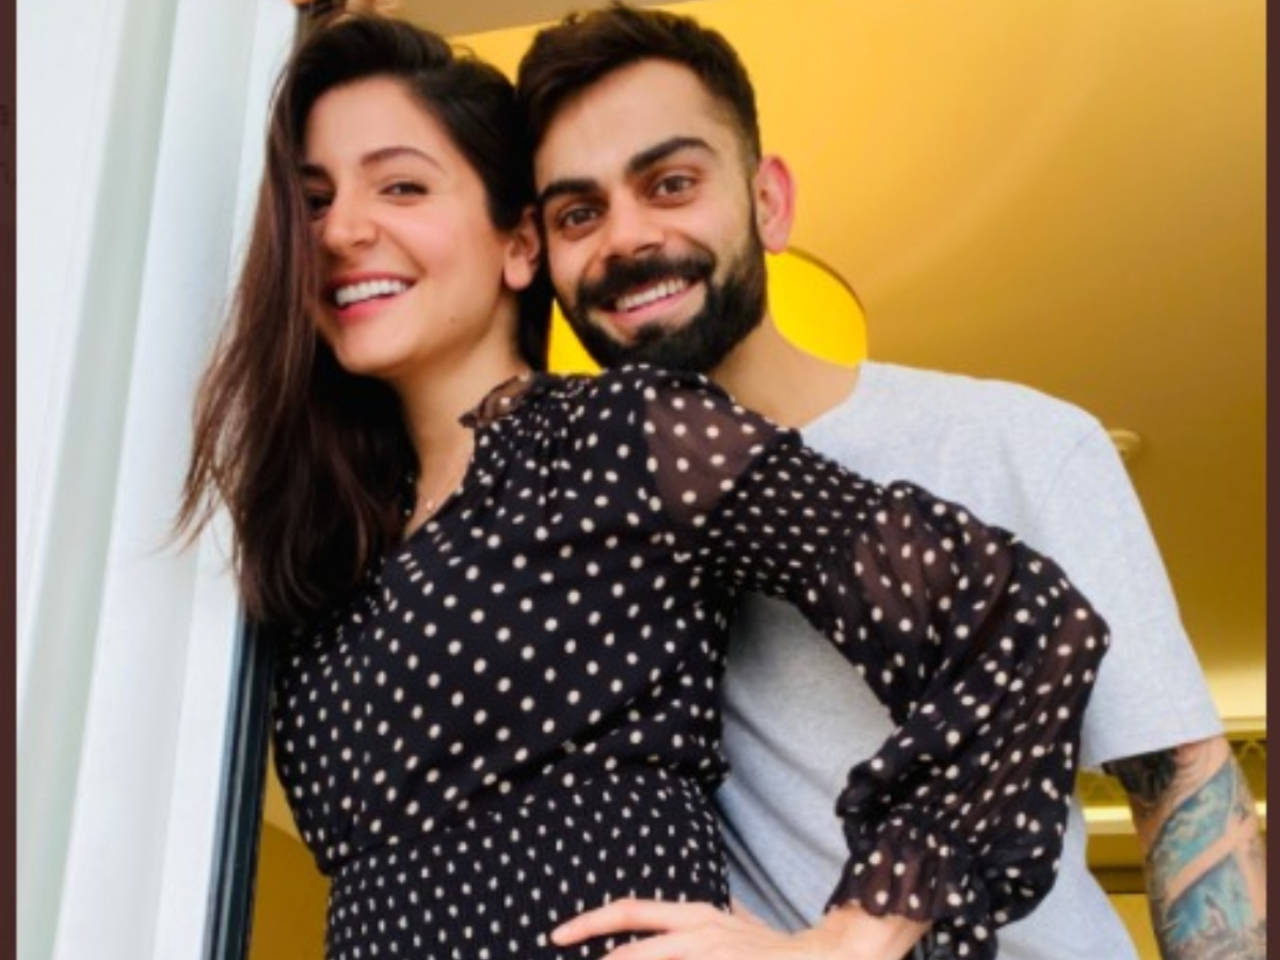 Lockdown baby Virat Kohli and Anushka Sharma to welcome their first child in 2021